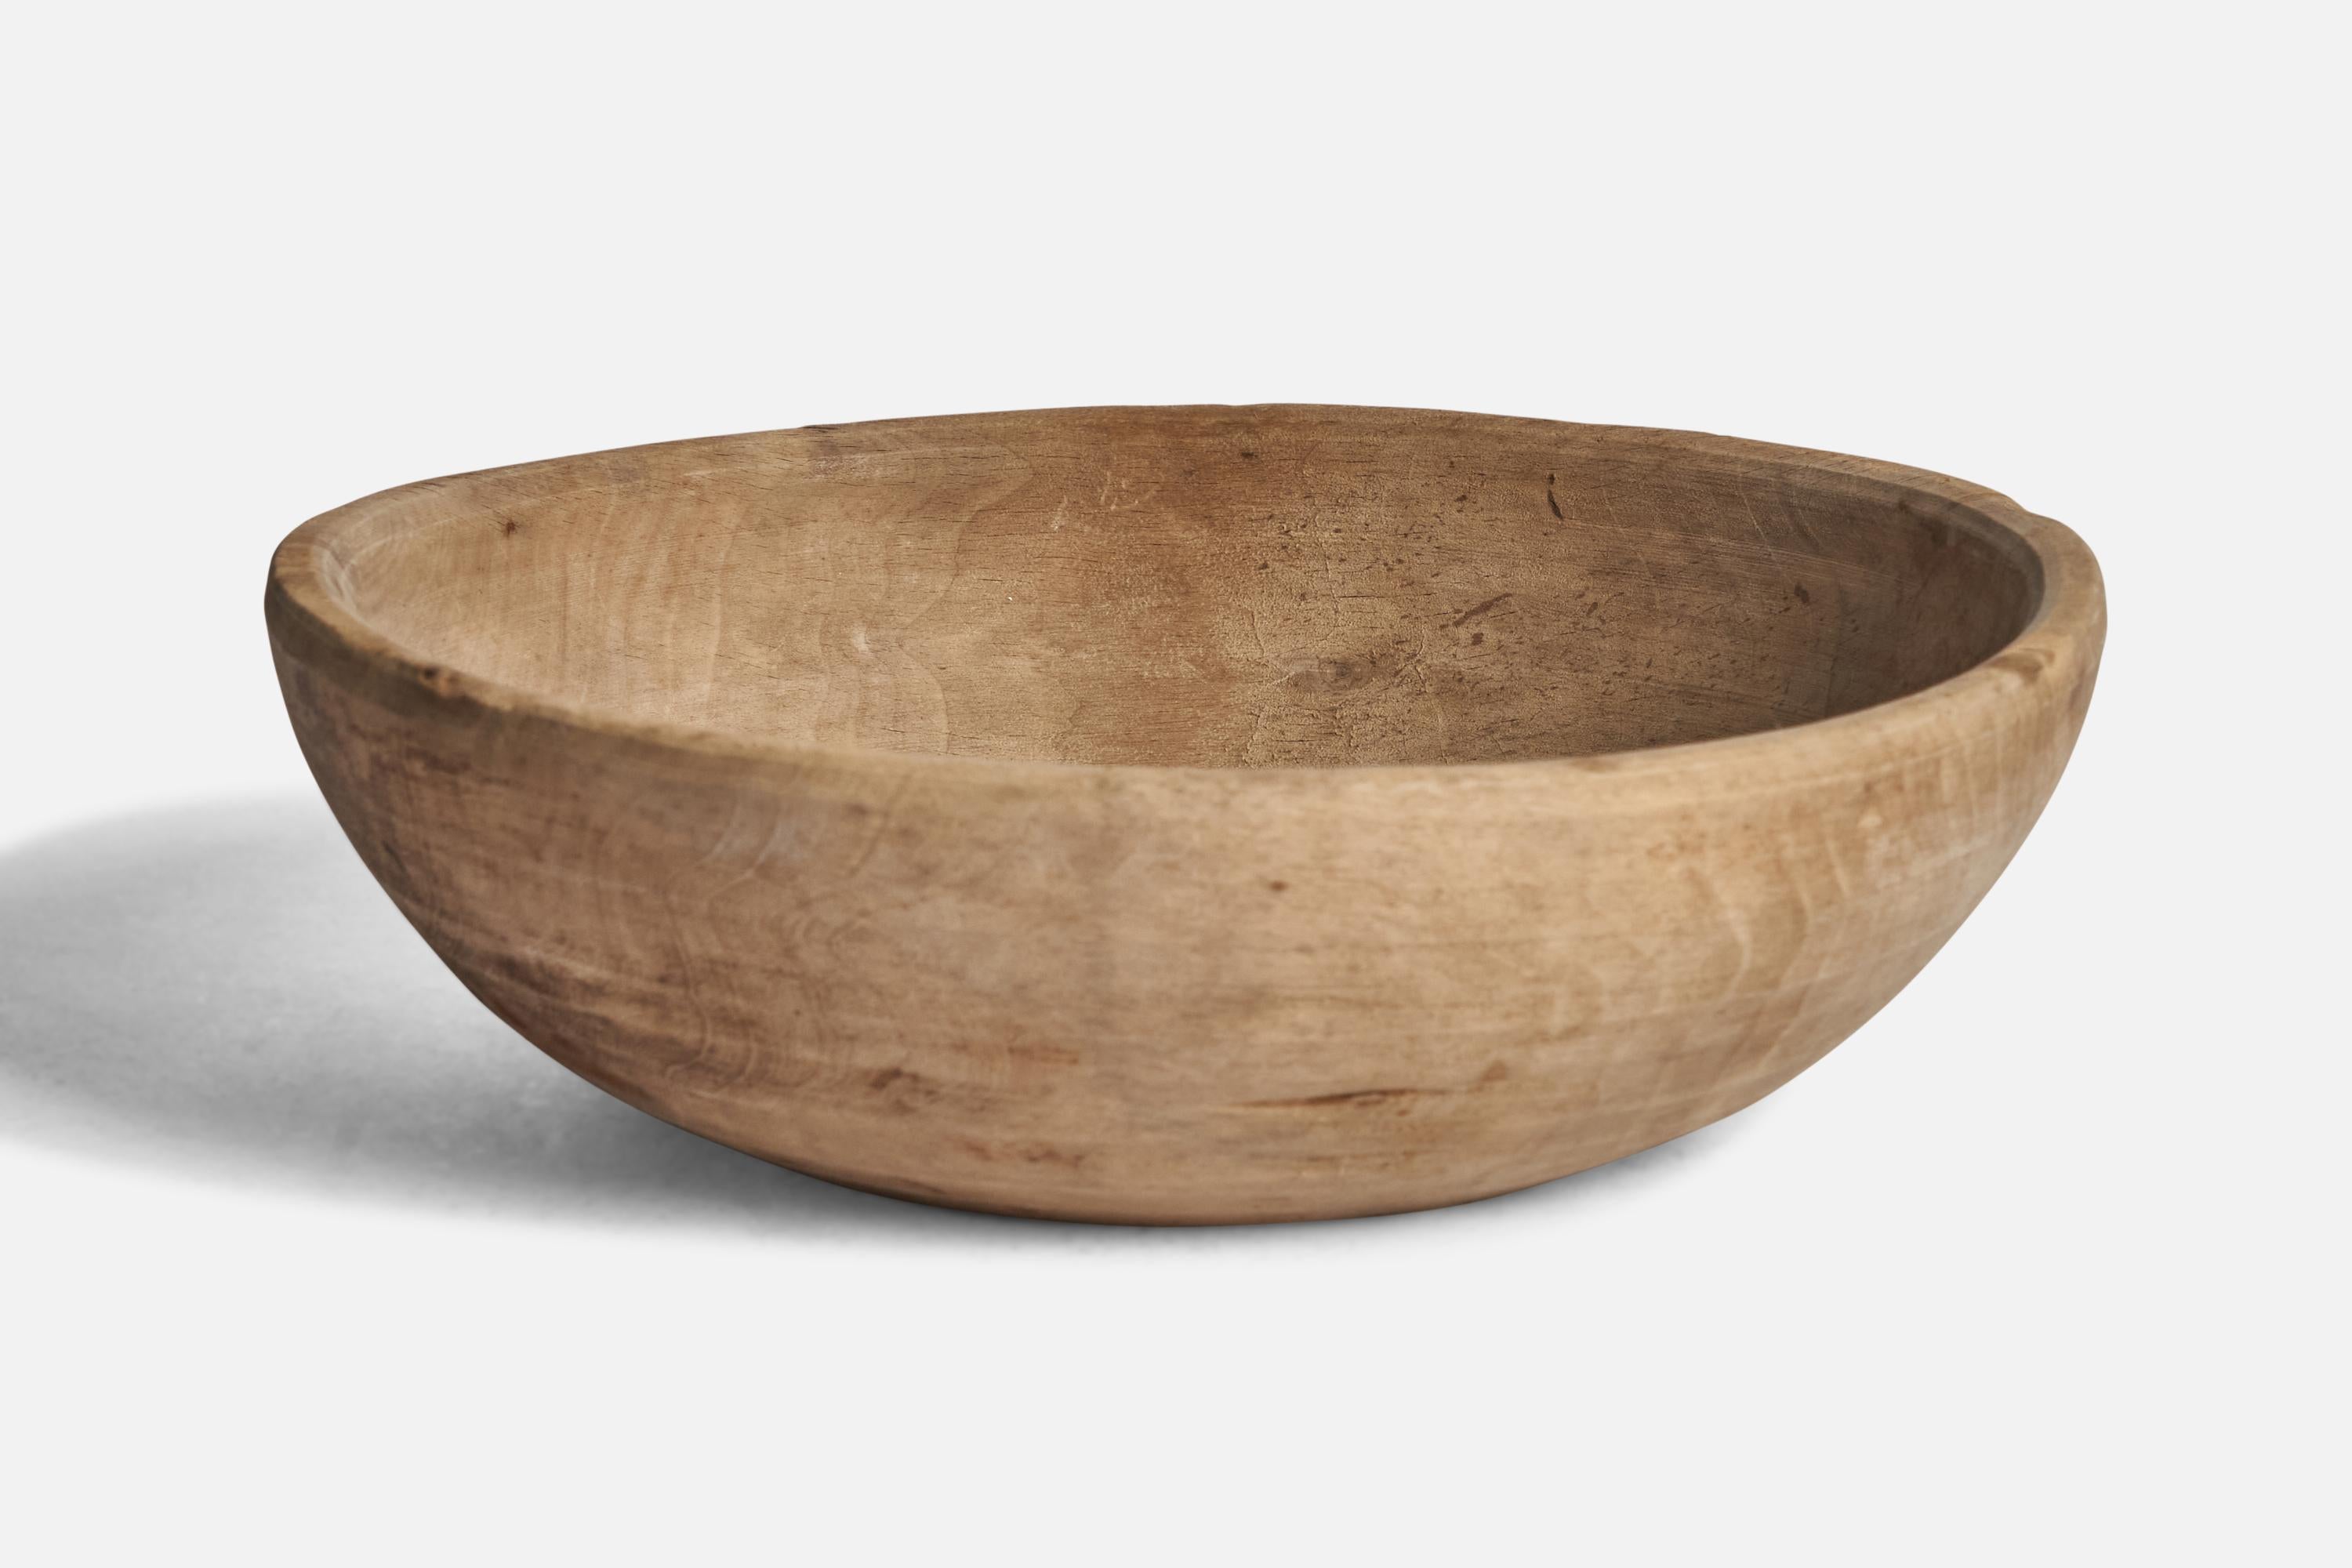 A wooden bowl produced in Sweden, 19th century.